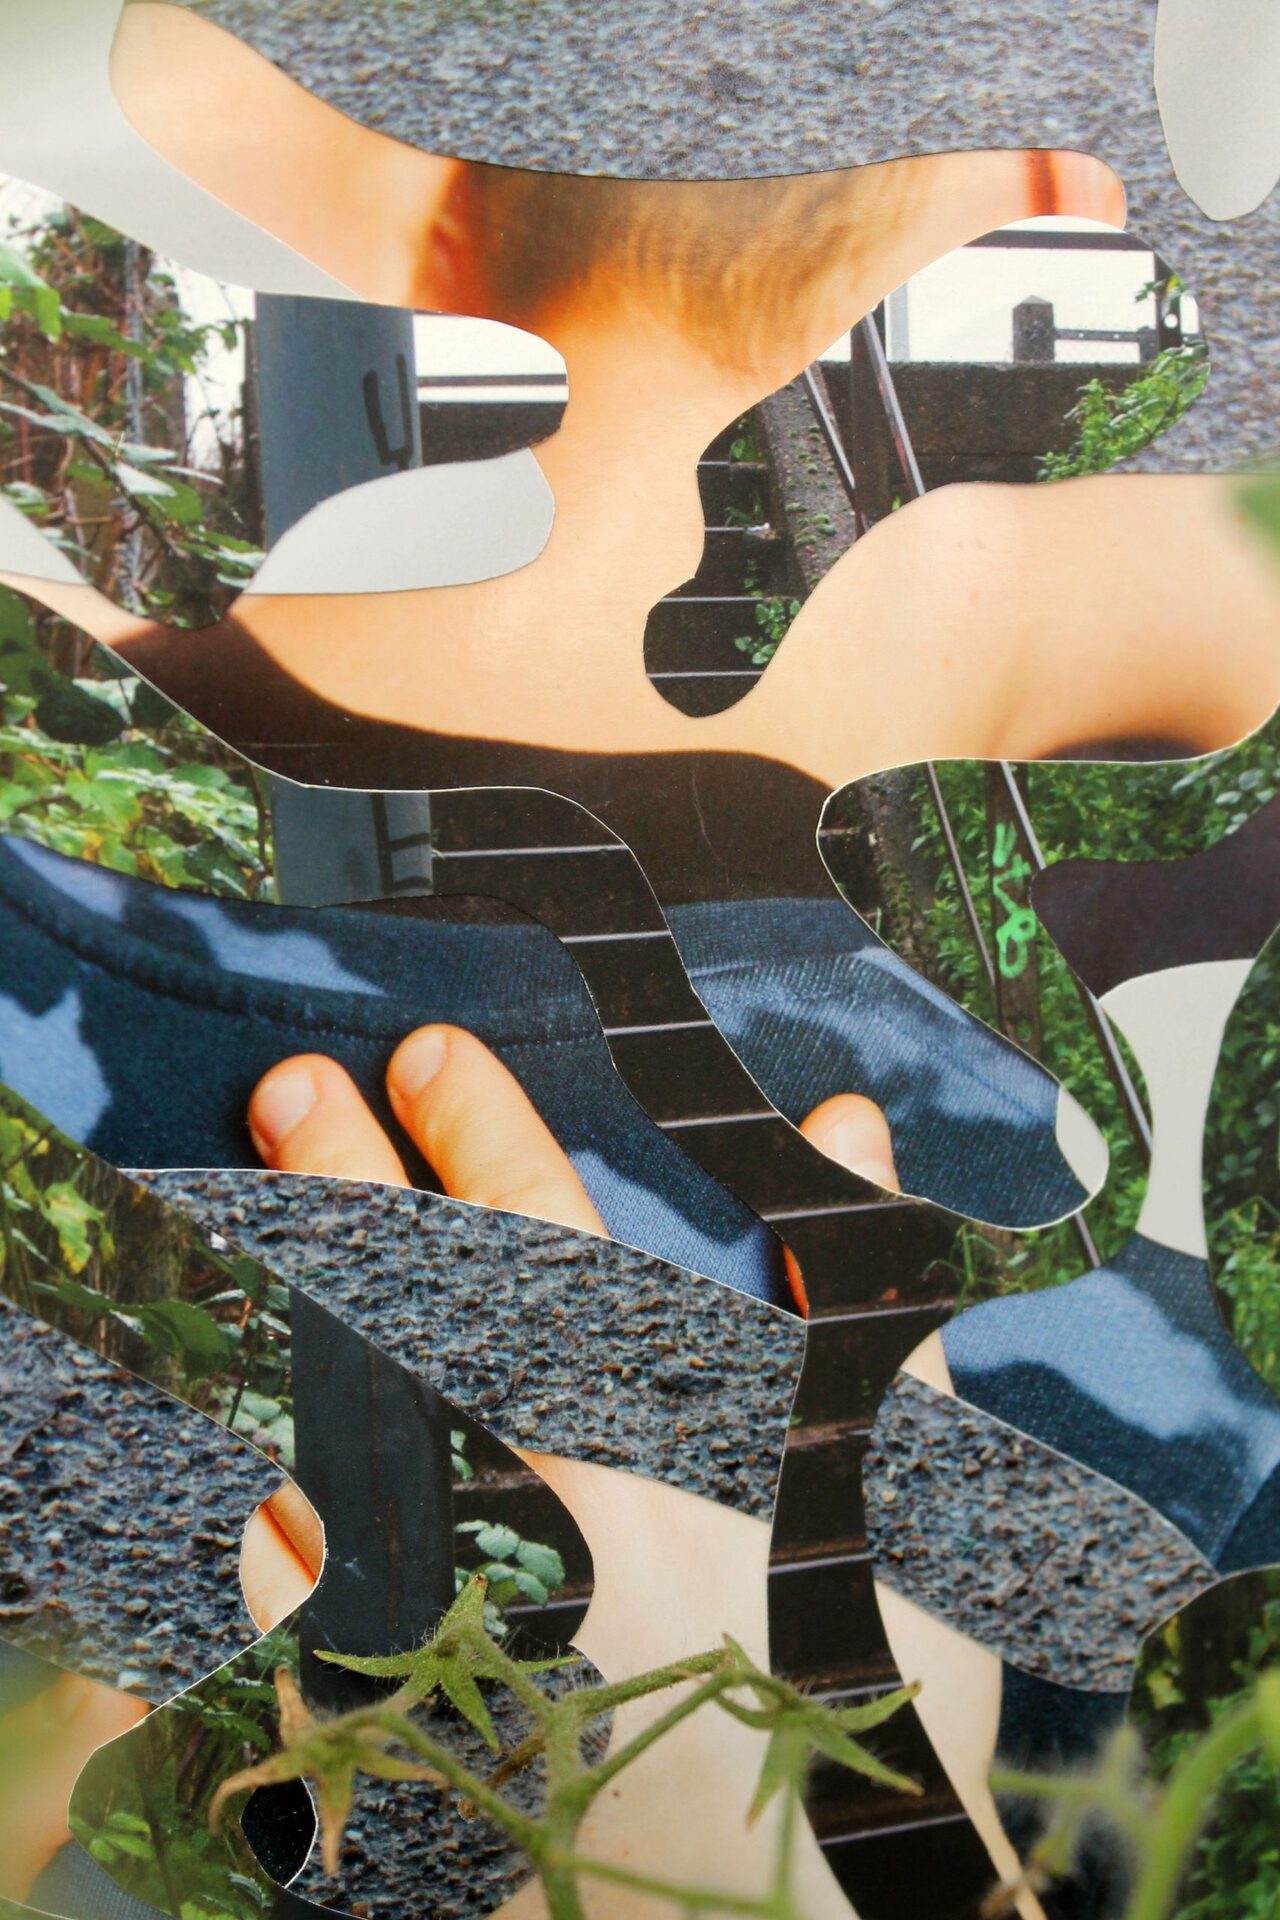 Kristoffer Ala-Ketola: Document Camouflage. Pigment print and collage on paper,, 43 x 28 cm.